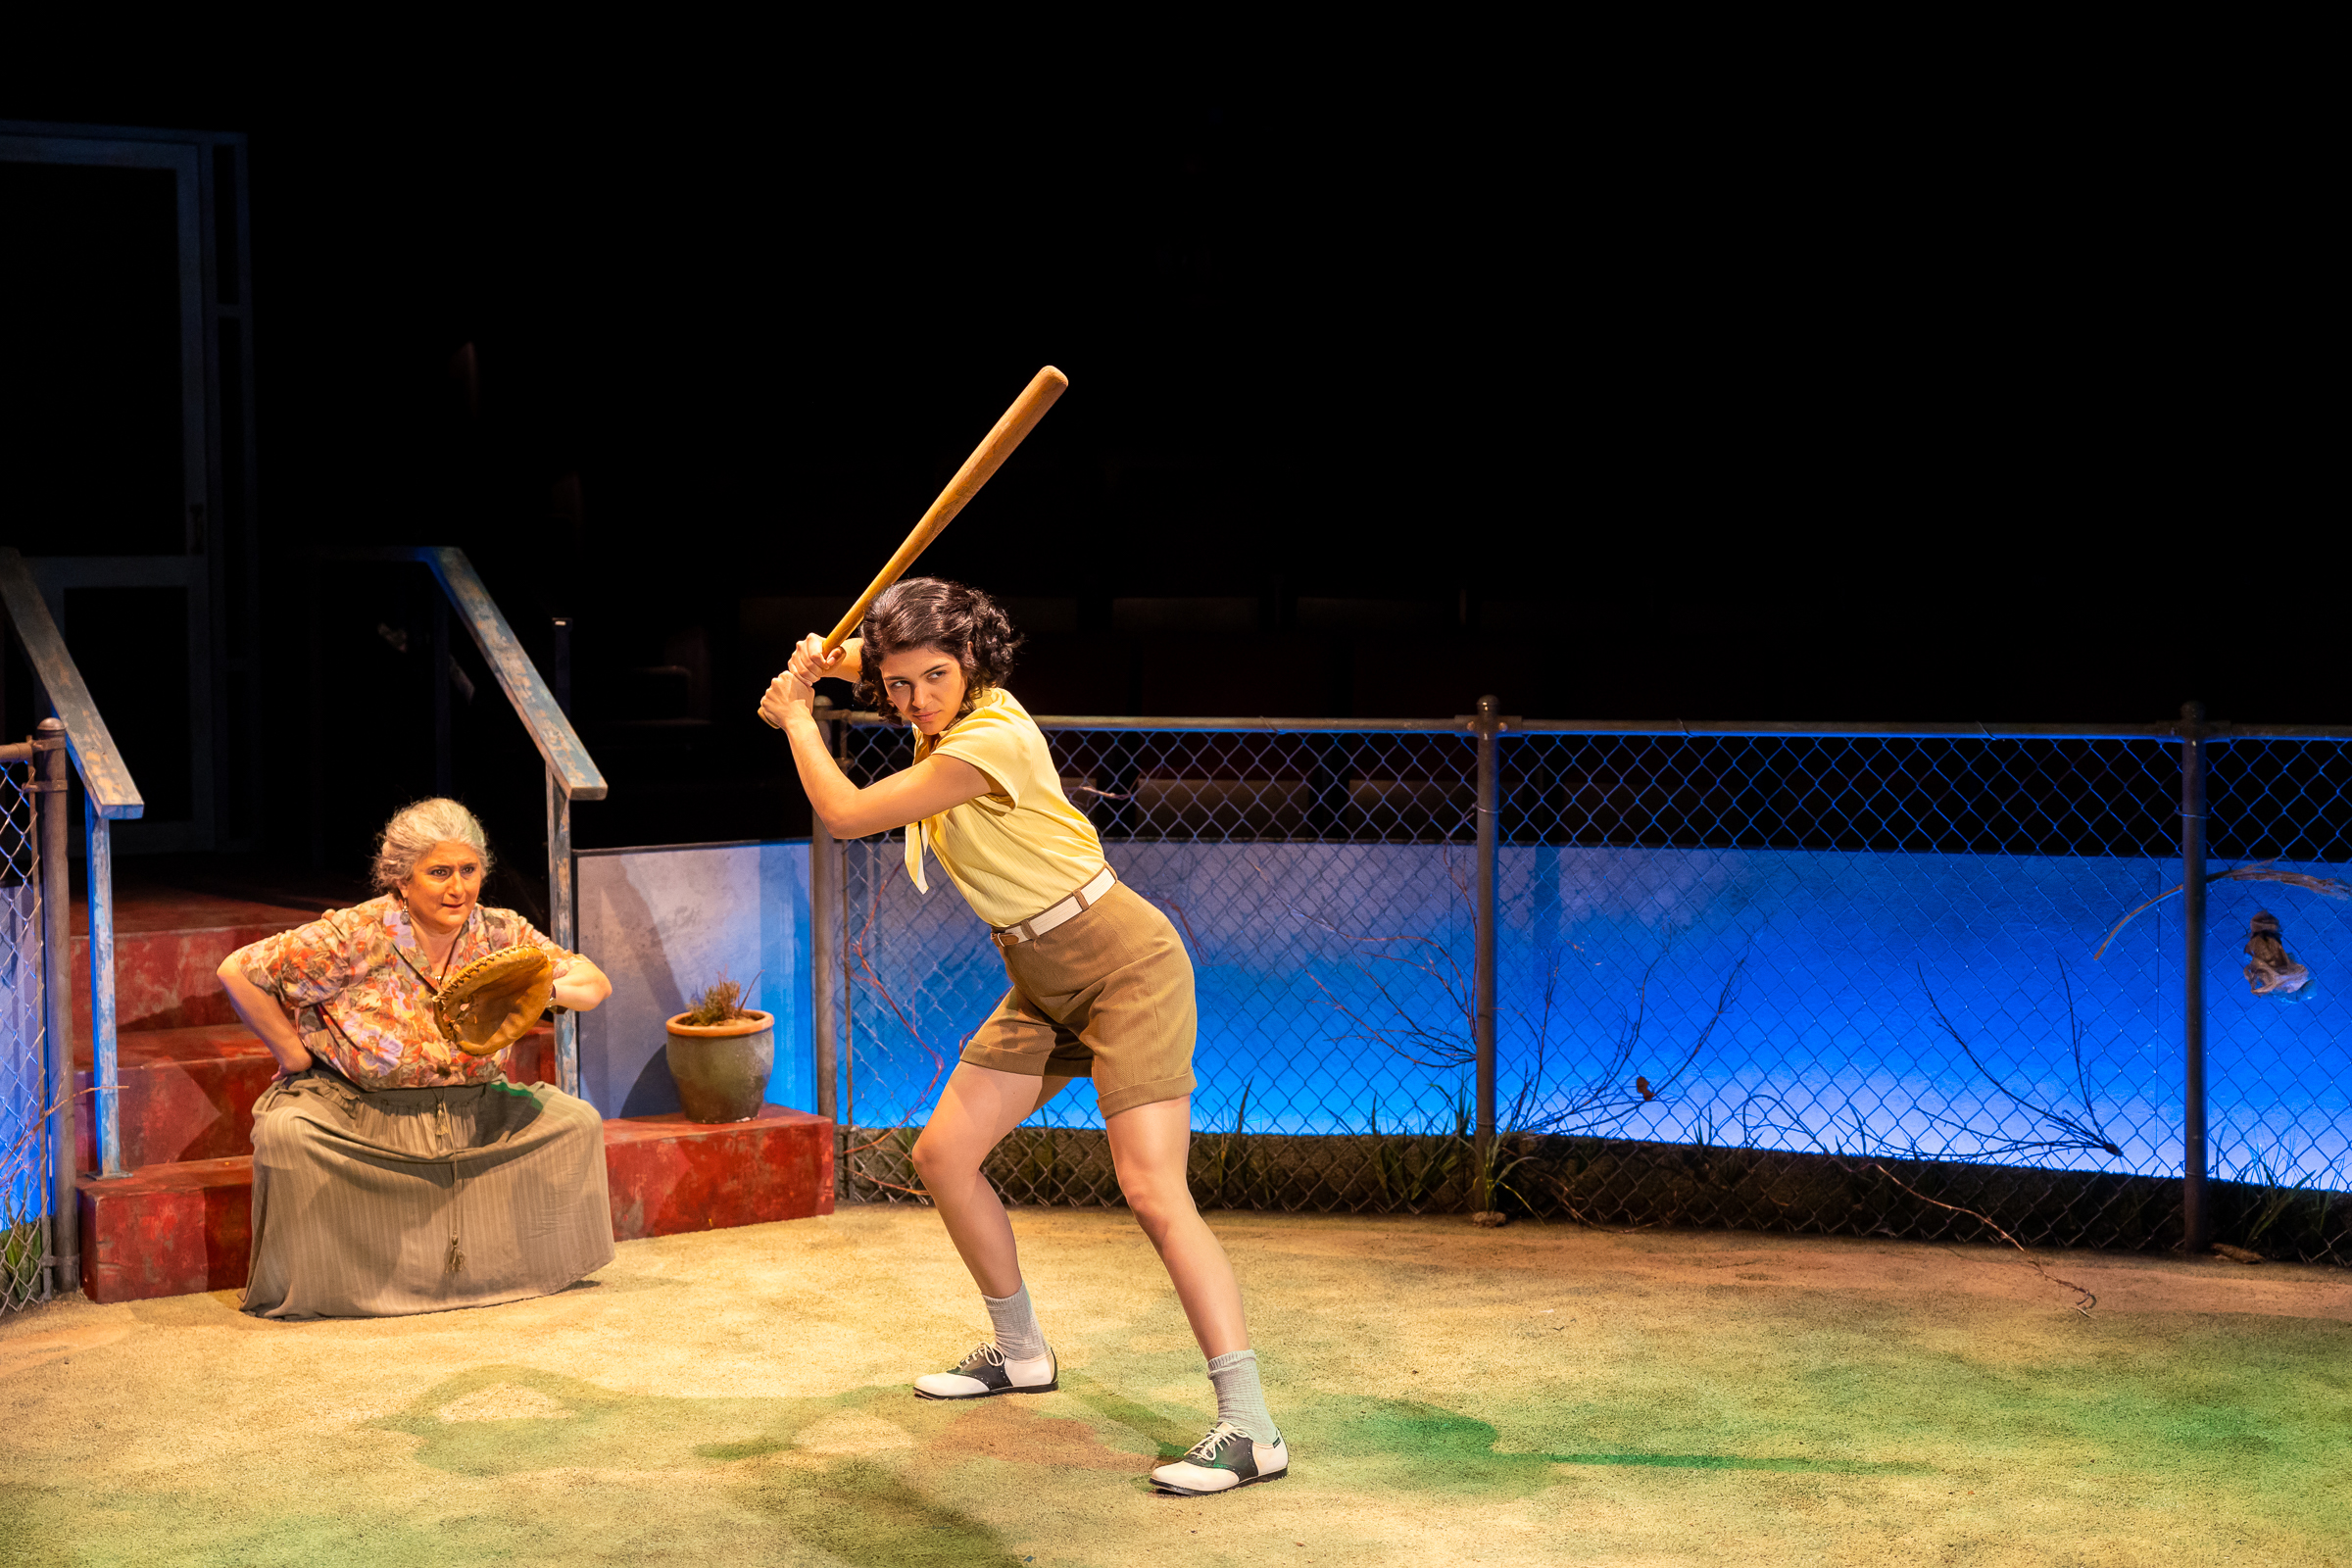 (from left) Laura Crotte as Elí and Ana Nicolle Chavez as Paloma in The Old Globe’s Under a Baseball Sky, February 11 – March 12, 2023. Photo by Rich Soublet II.